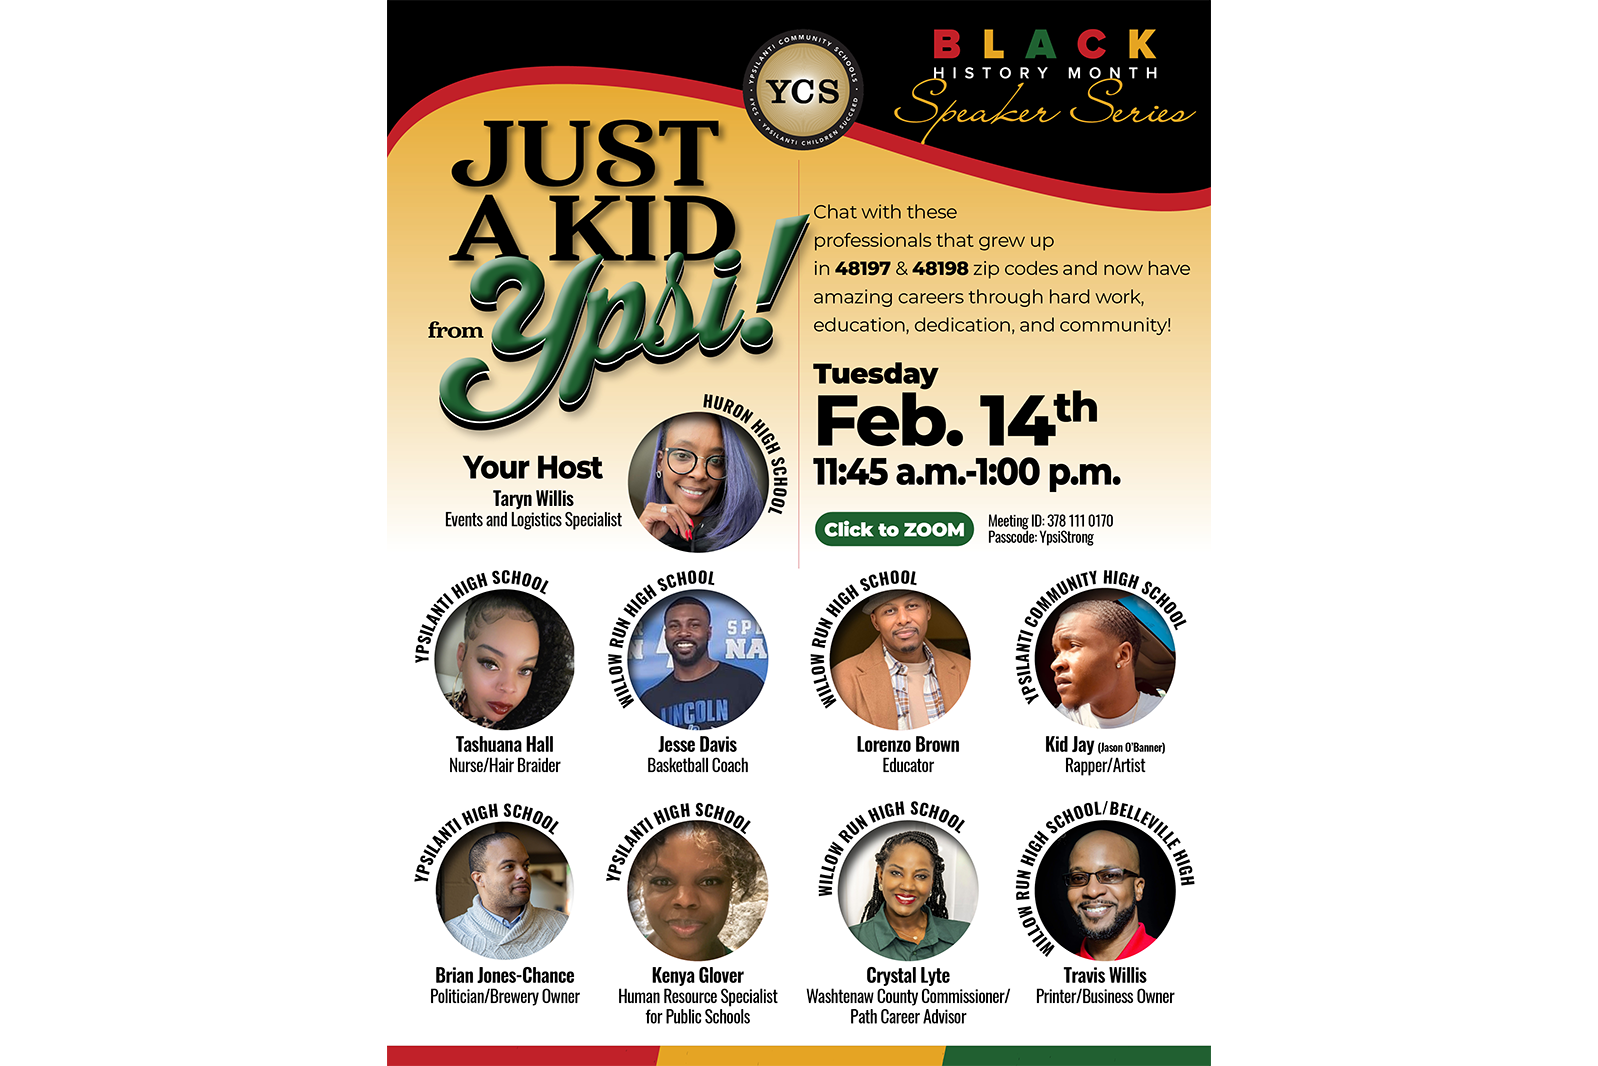 A flyer for the "Just a Kid From Ypsi" panel discussion, which is part of Ypsilanti Community Schools' Black History Month Series.